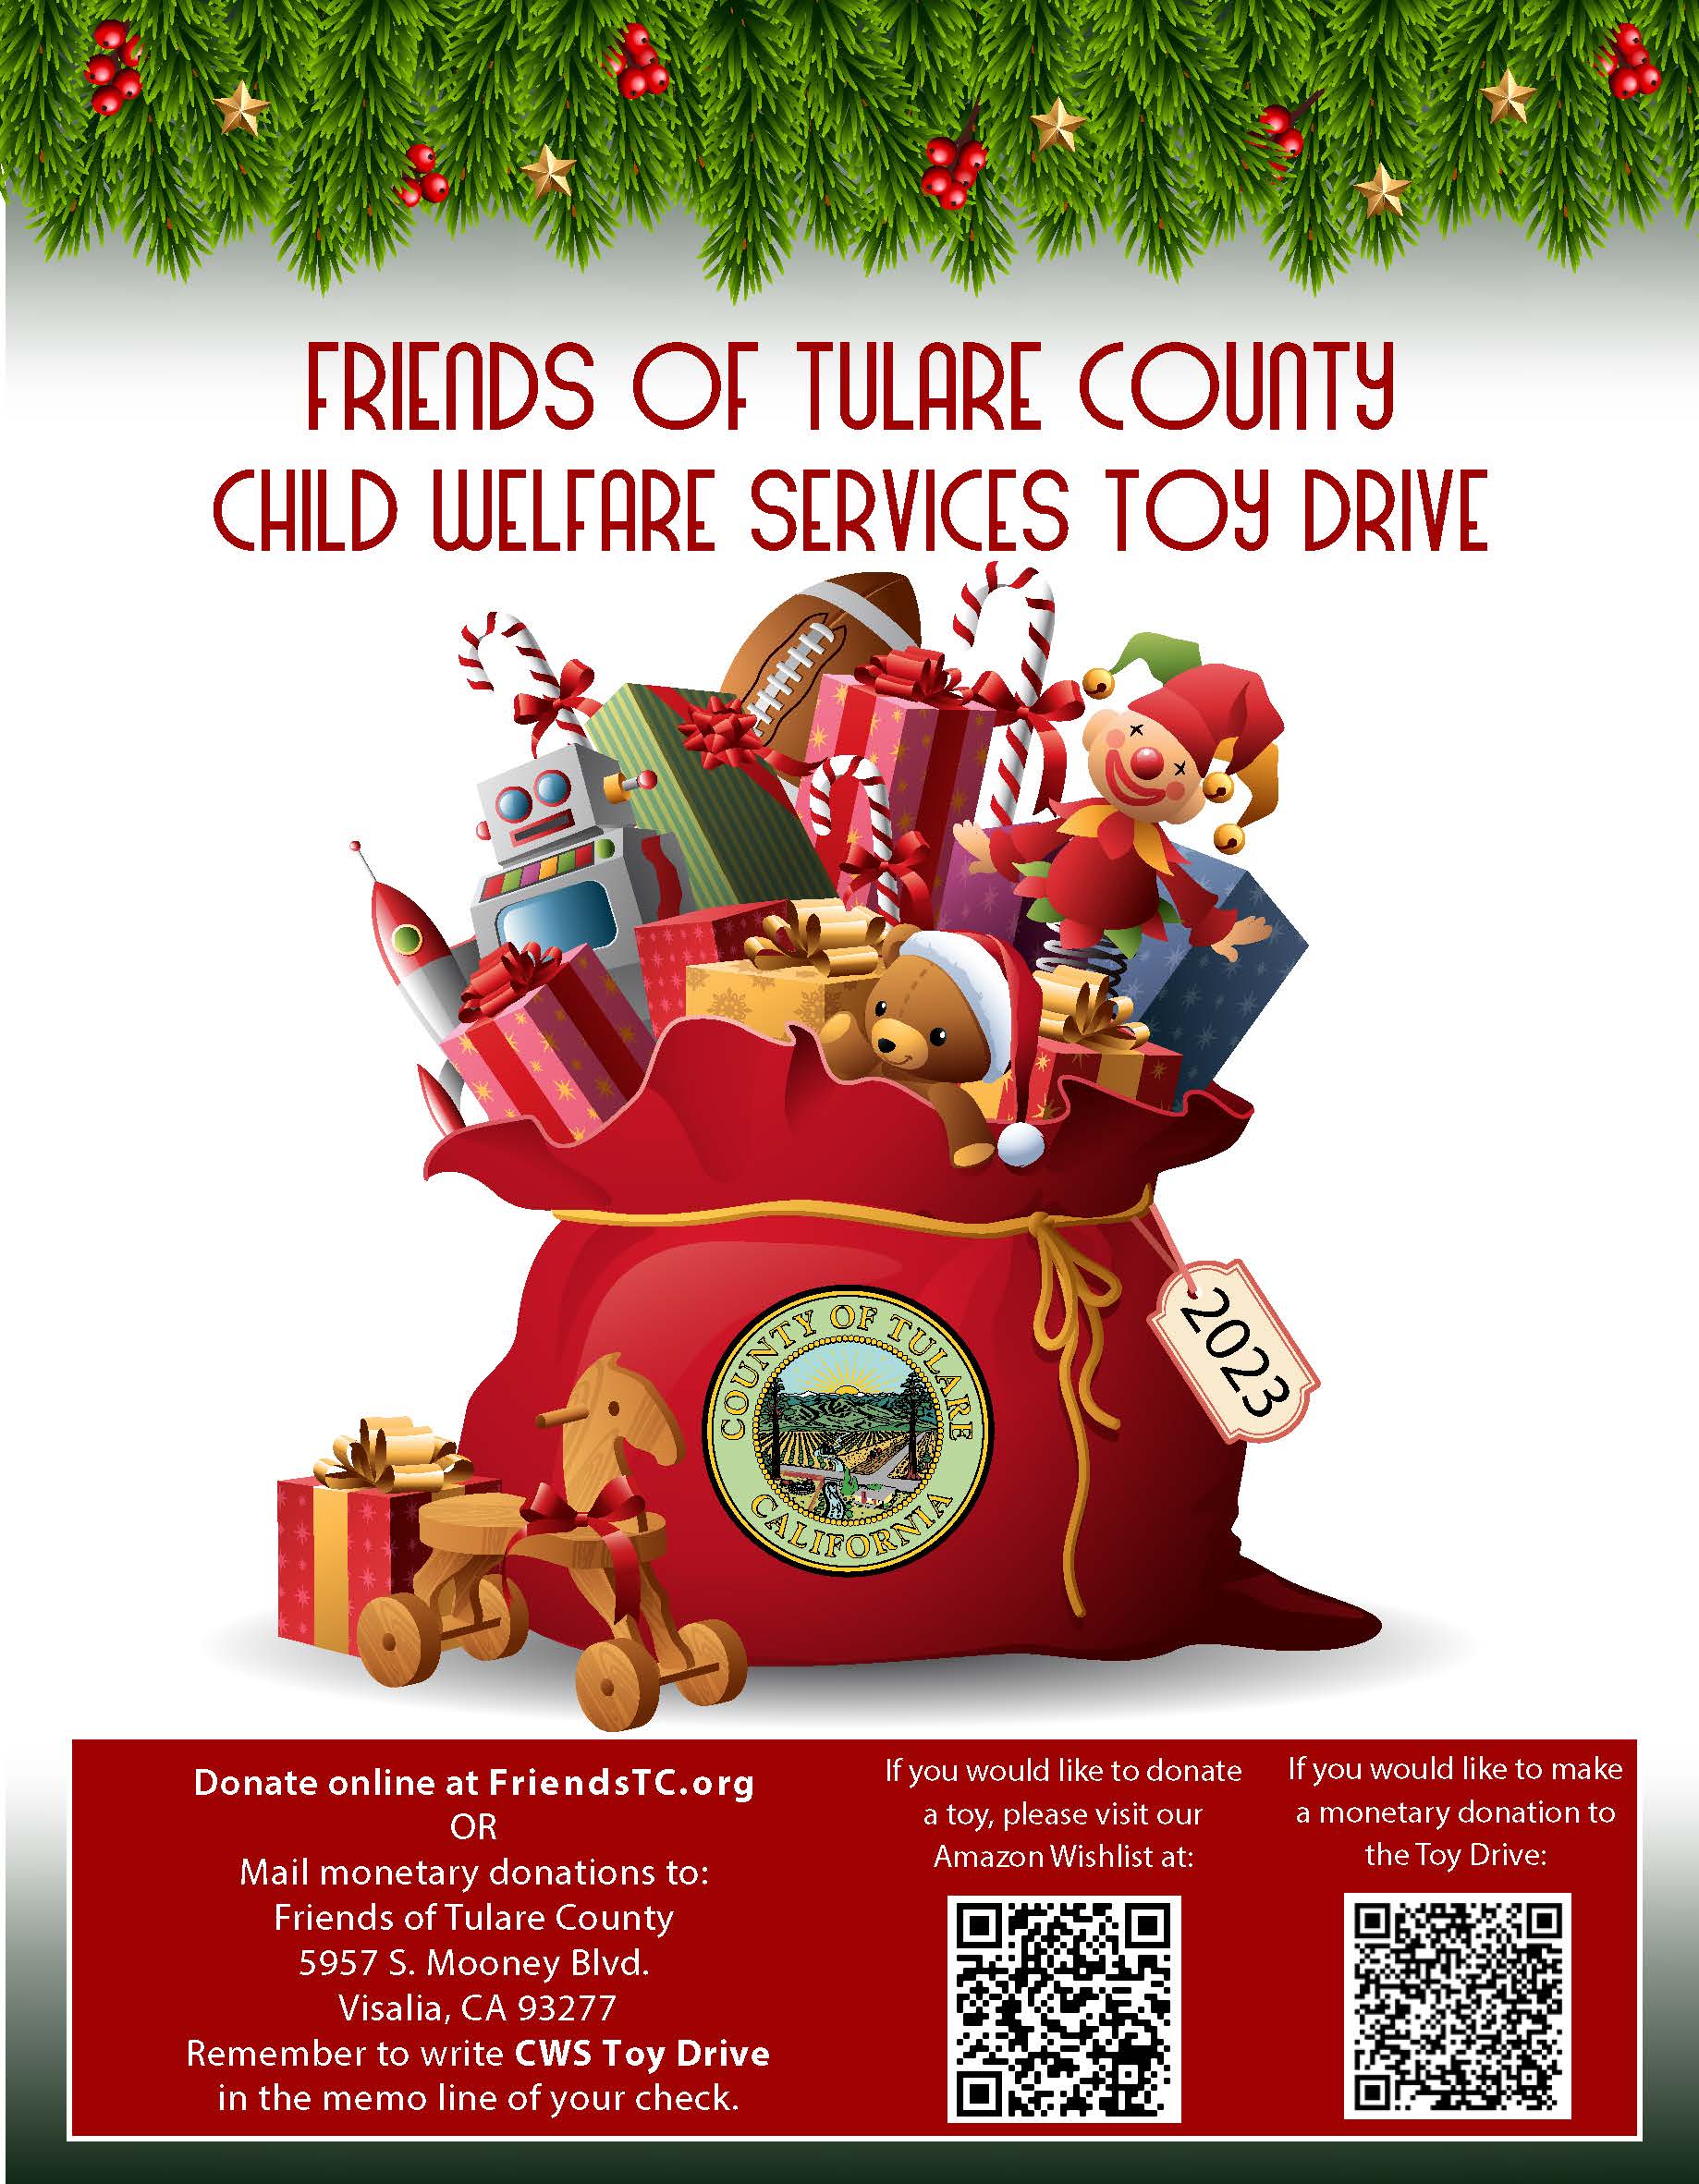 CWS Children's Toy Drive and You - Friends of Tulare County